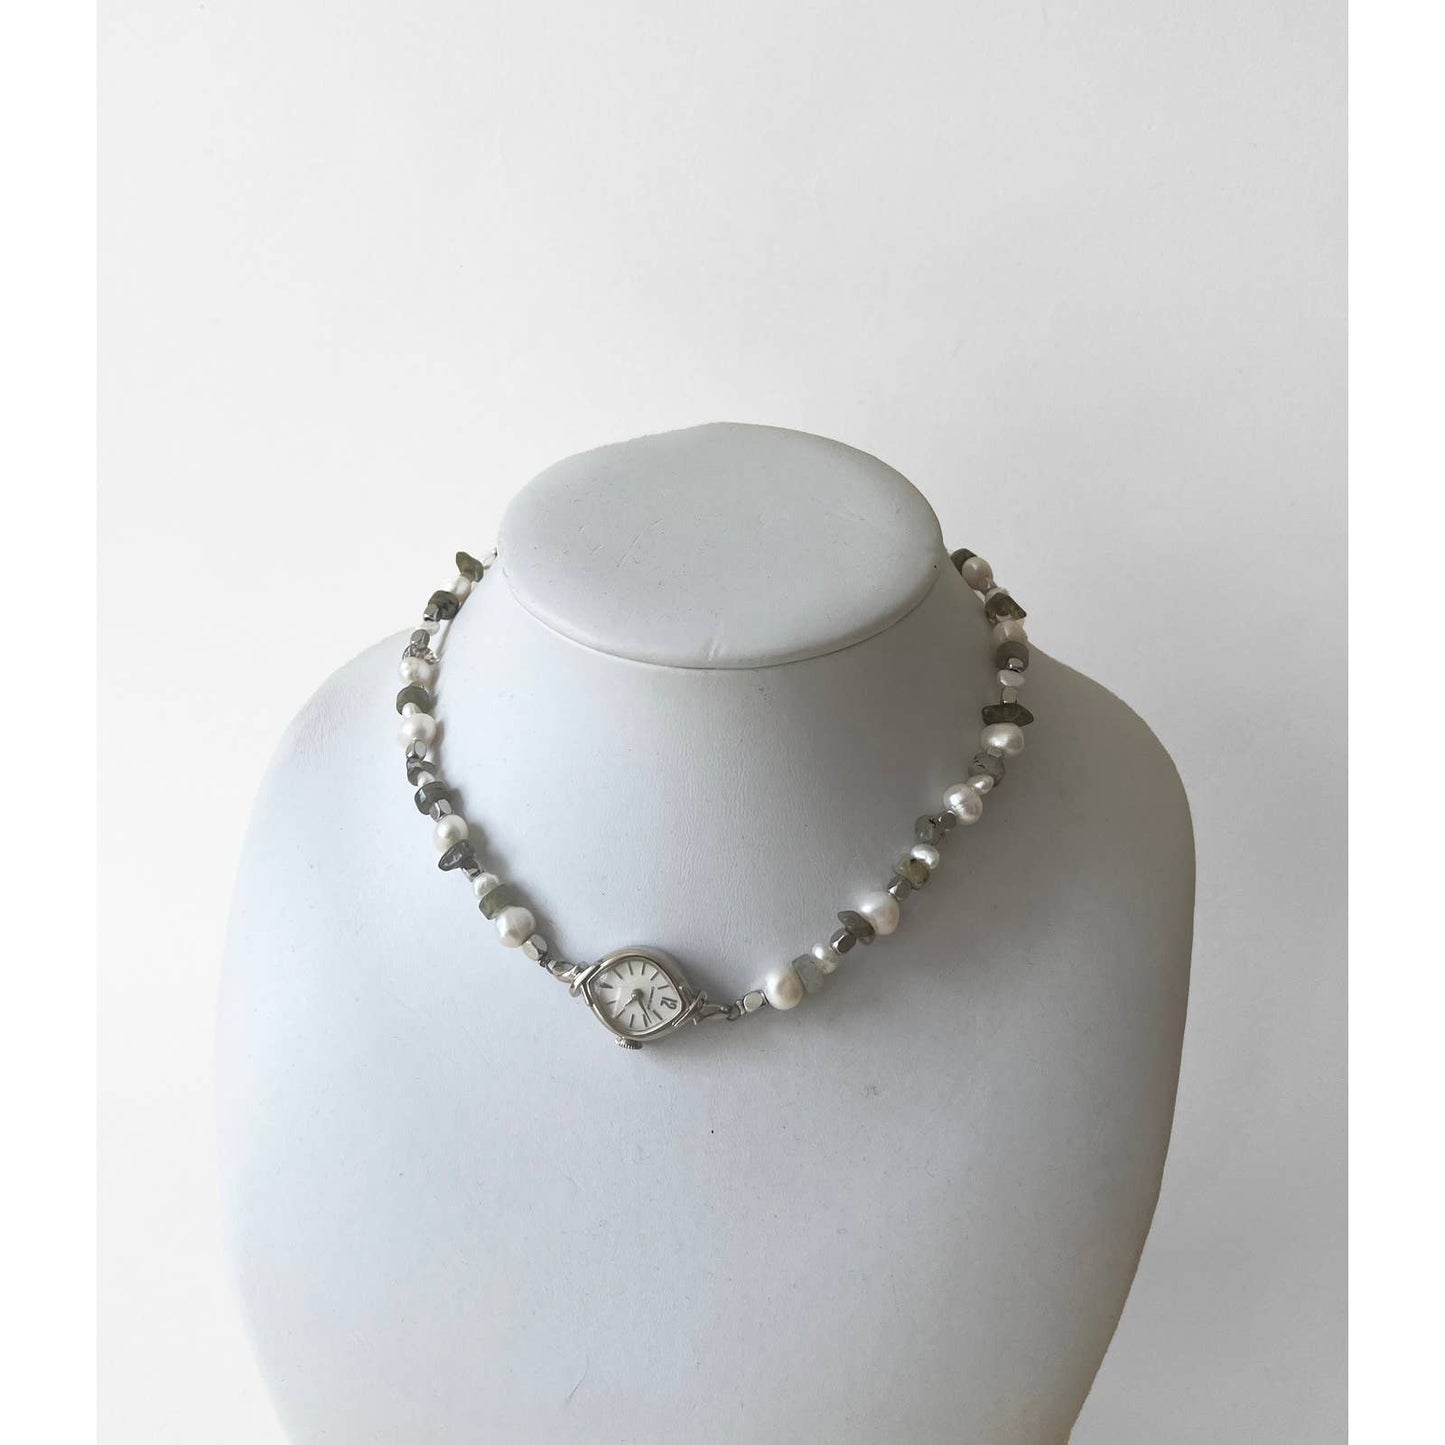 Watch Necklace | Vintage One of a Kind Watch Choker with Pearls and Laborite Details